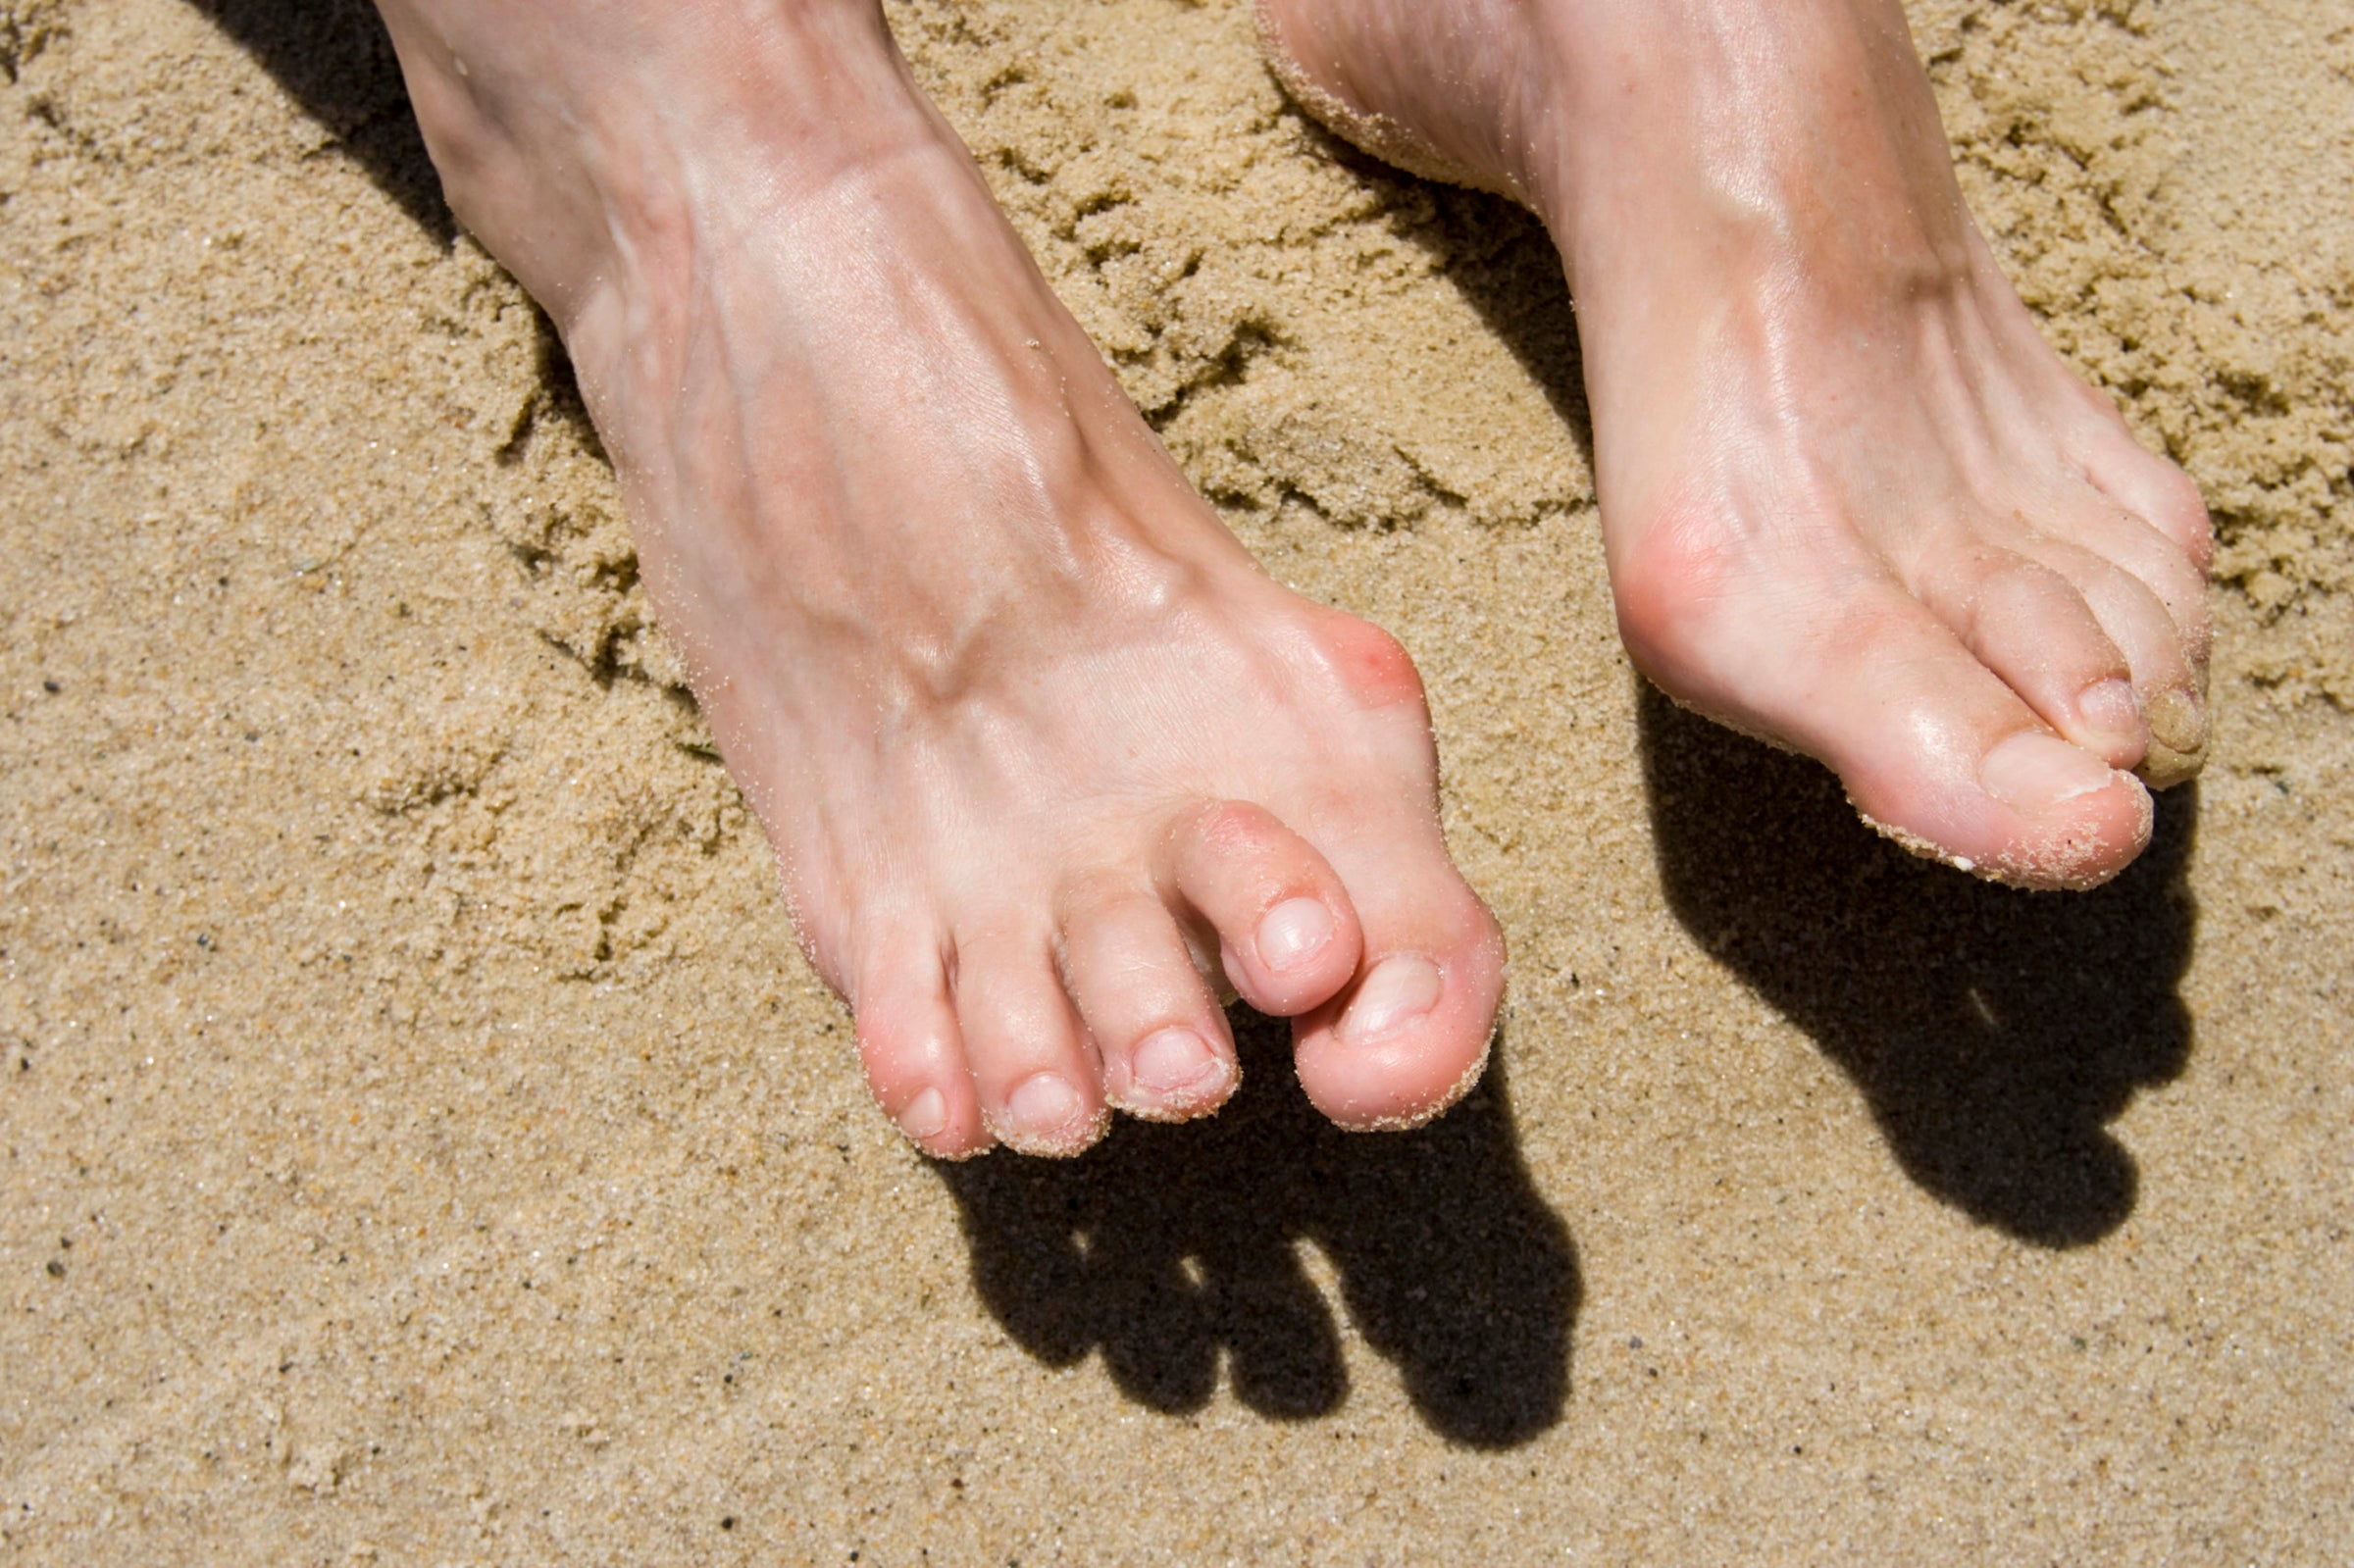 Bare feet in sand, visible hammer toes on both feet